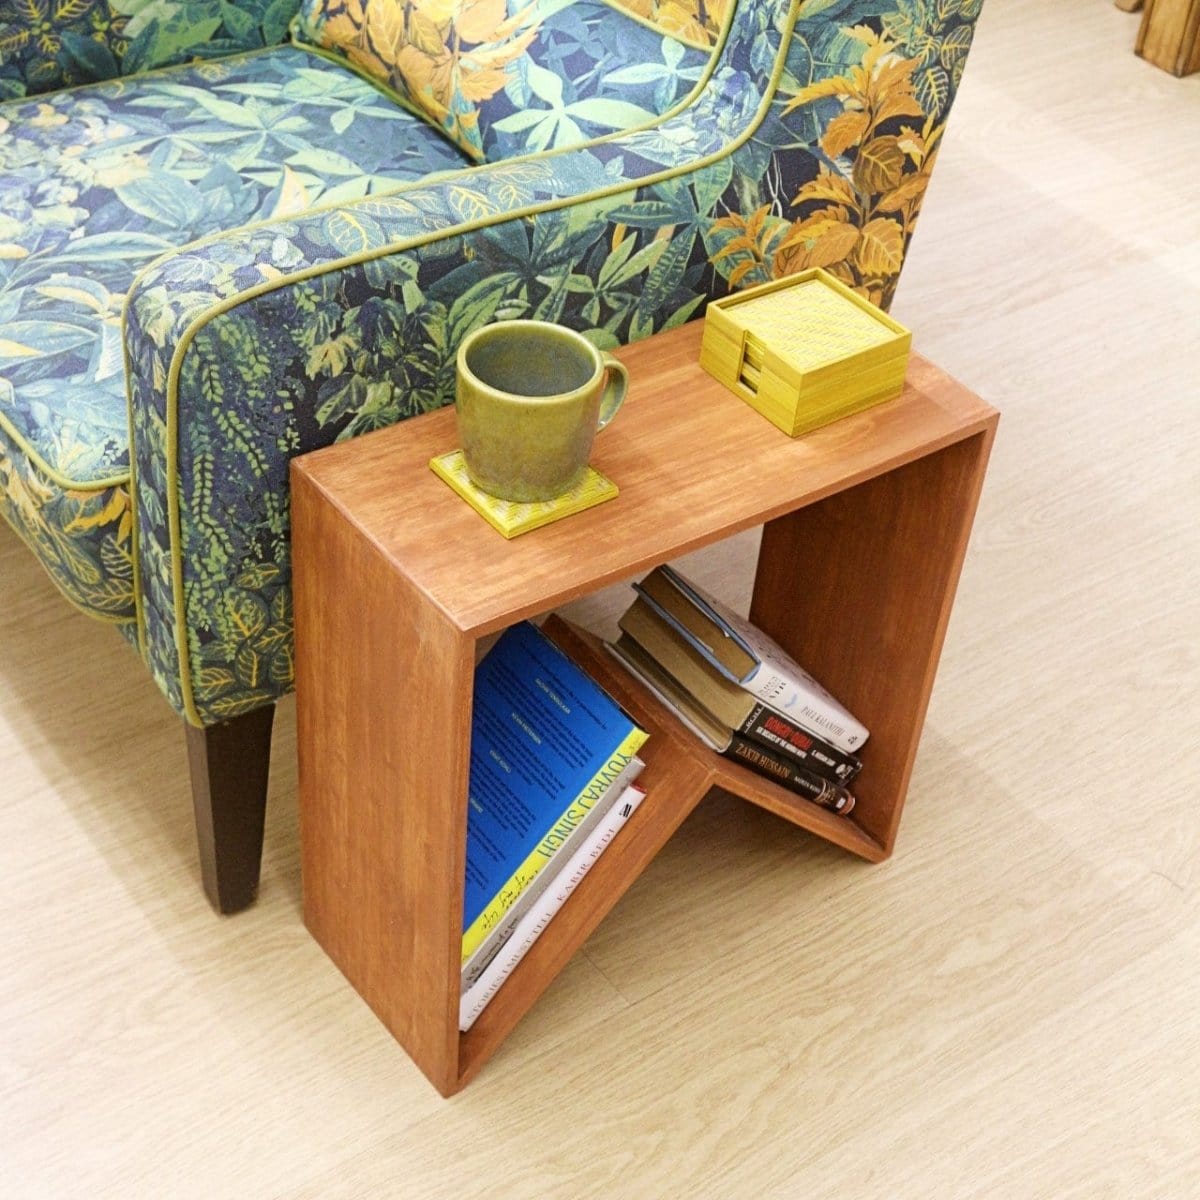 Barish Side Table for Book Lovers Best Home Decor Handcrafted